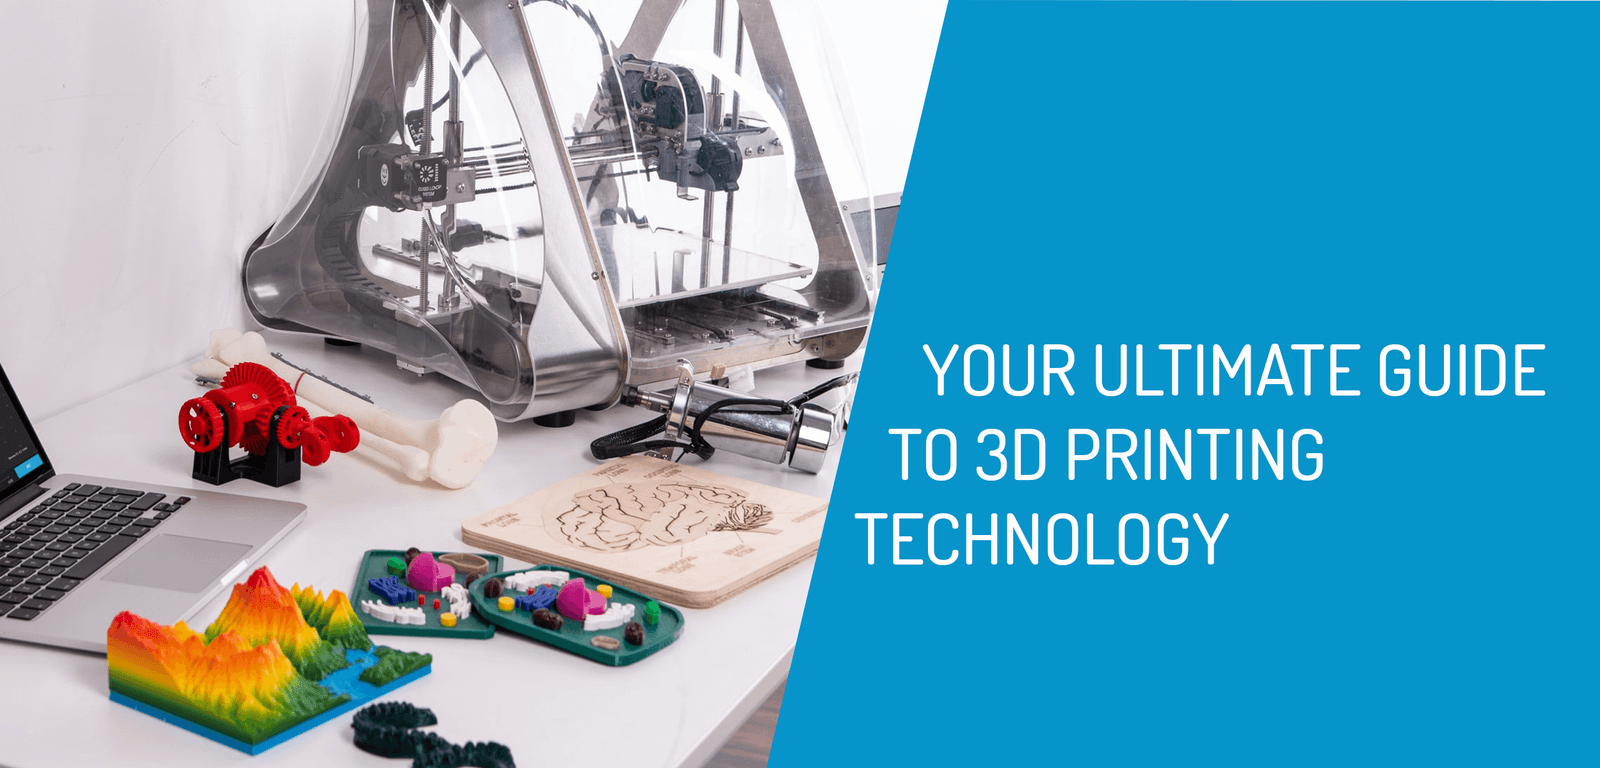 Our Ultimate Guide to 3D Printer Technology